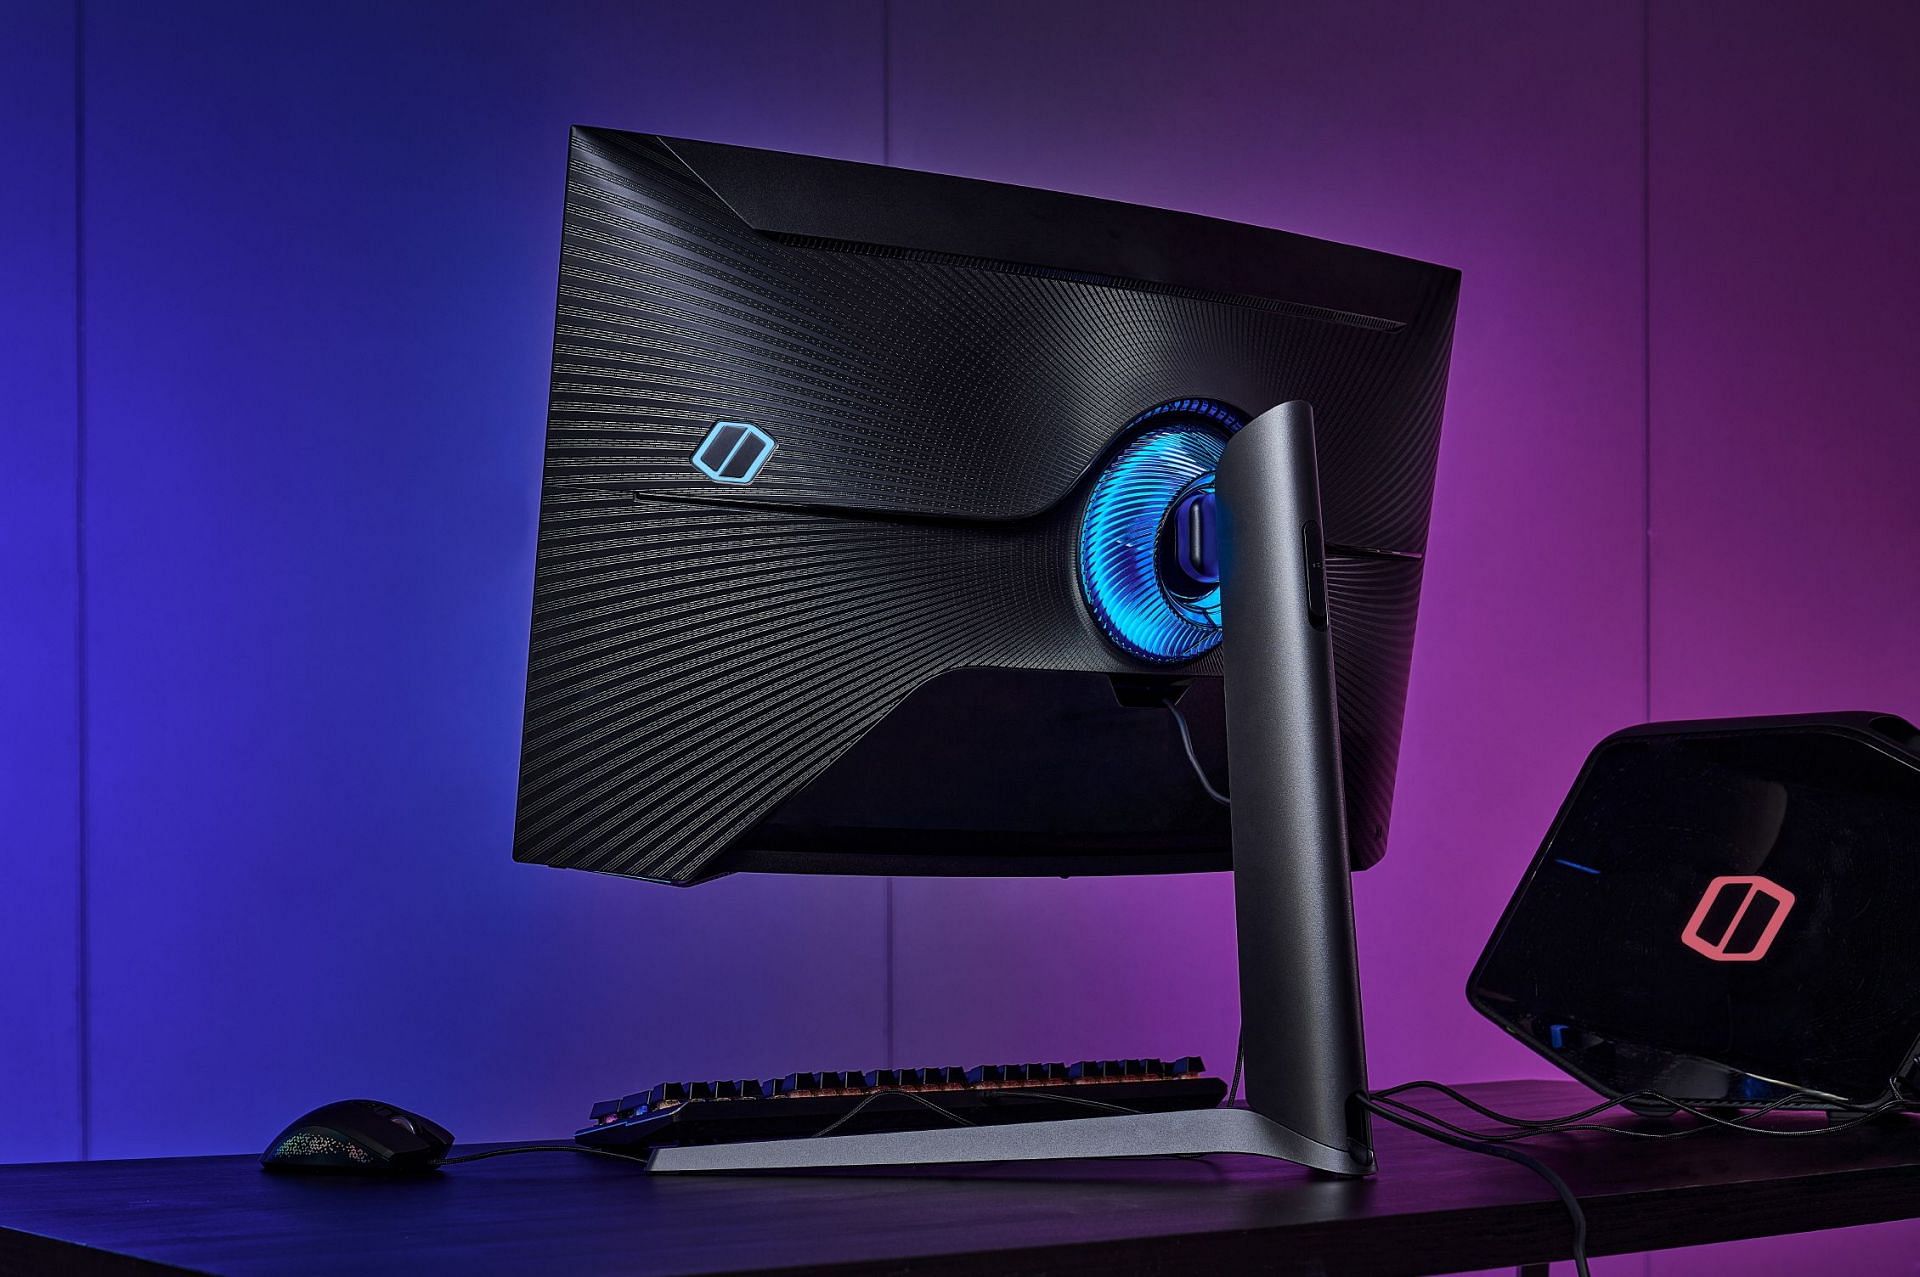 A 144 Hz refresh rate is suitable for professional gaming (Image via Samsung)